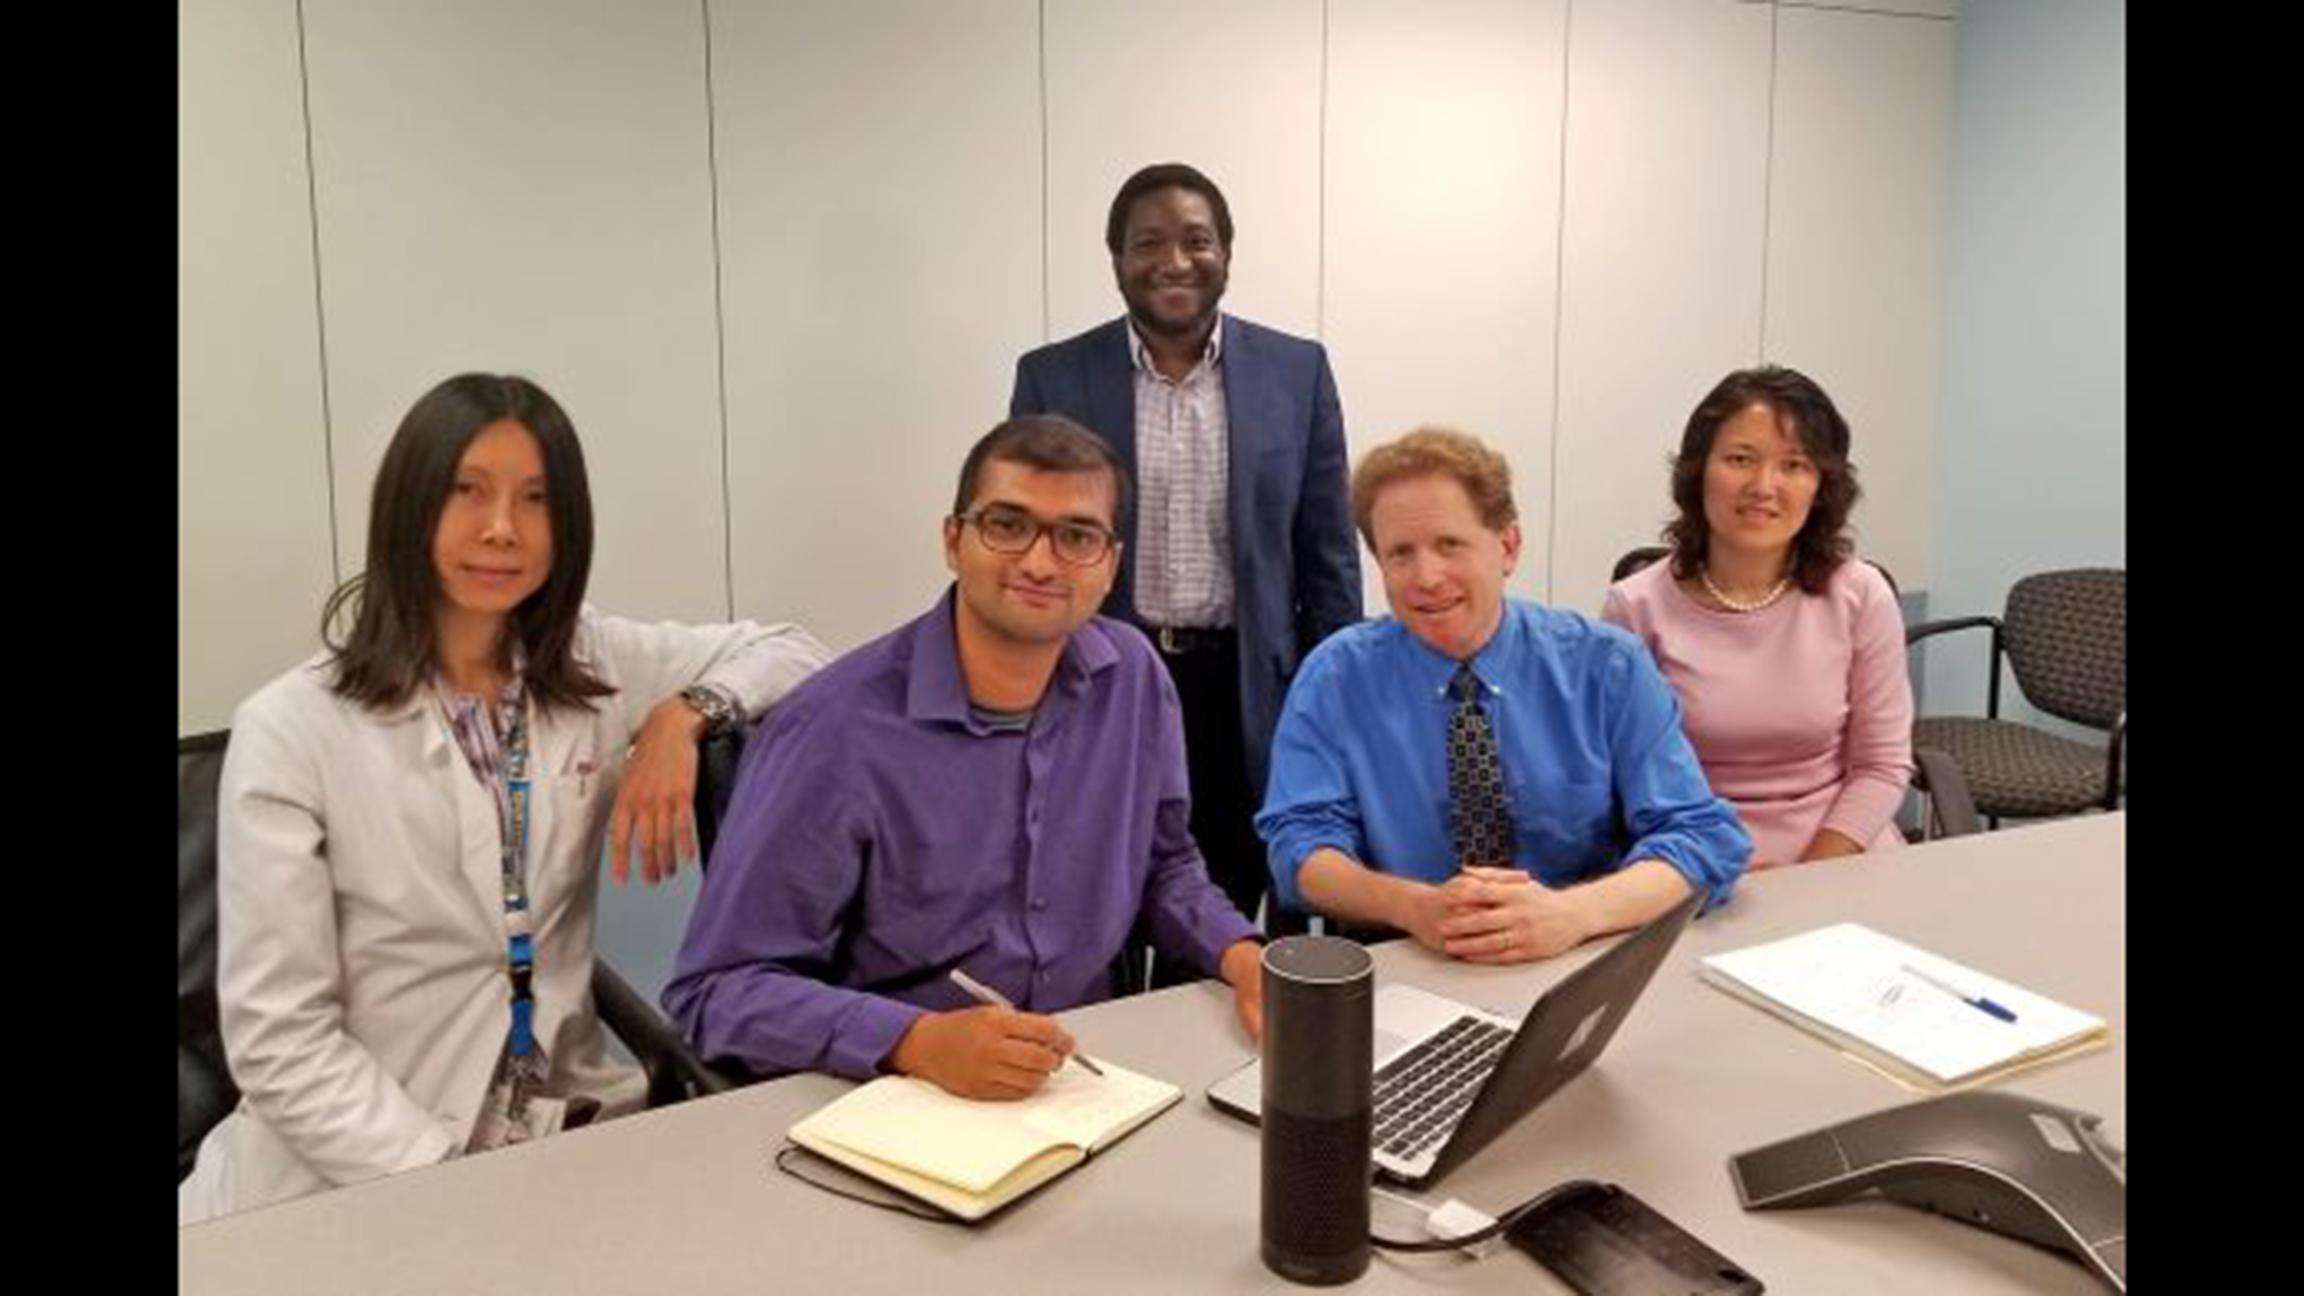 From left: UIC researchers Alex Leow, Faraz Hussain, Olu Ajilore, Ben Gerber and Jun Ma developed DiaBetty, a voice-enabled diabetes coach and educator as part of the Alexa Diabetes Challenge. (Courtesy of the University of Illinois at Chicago)